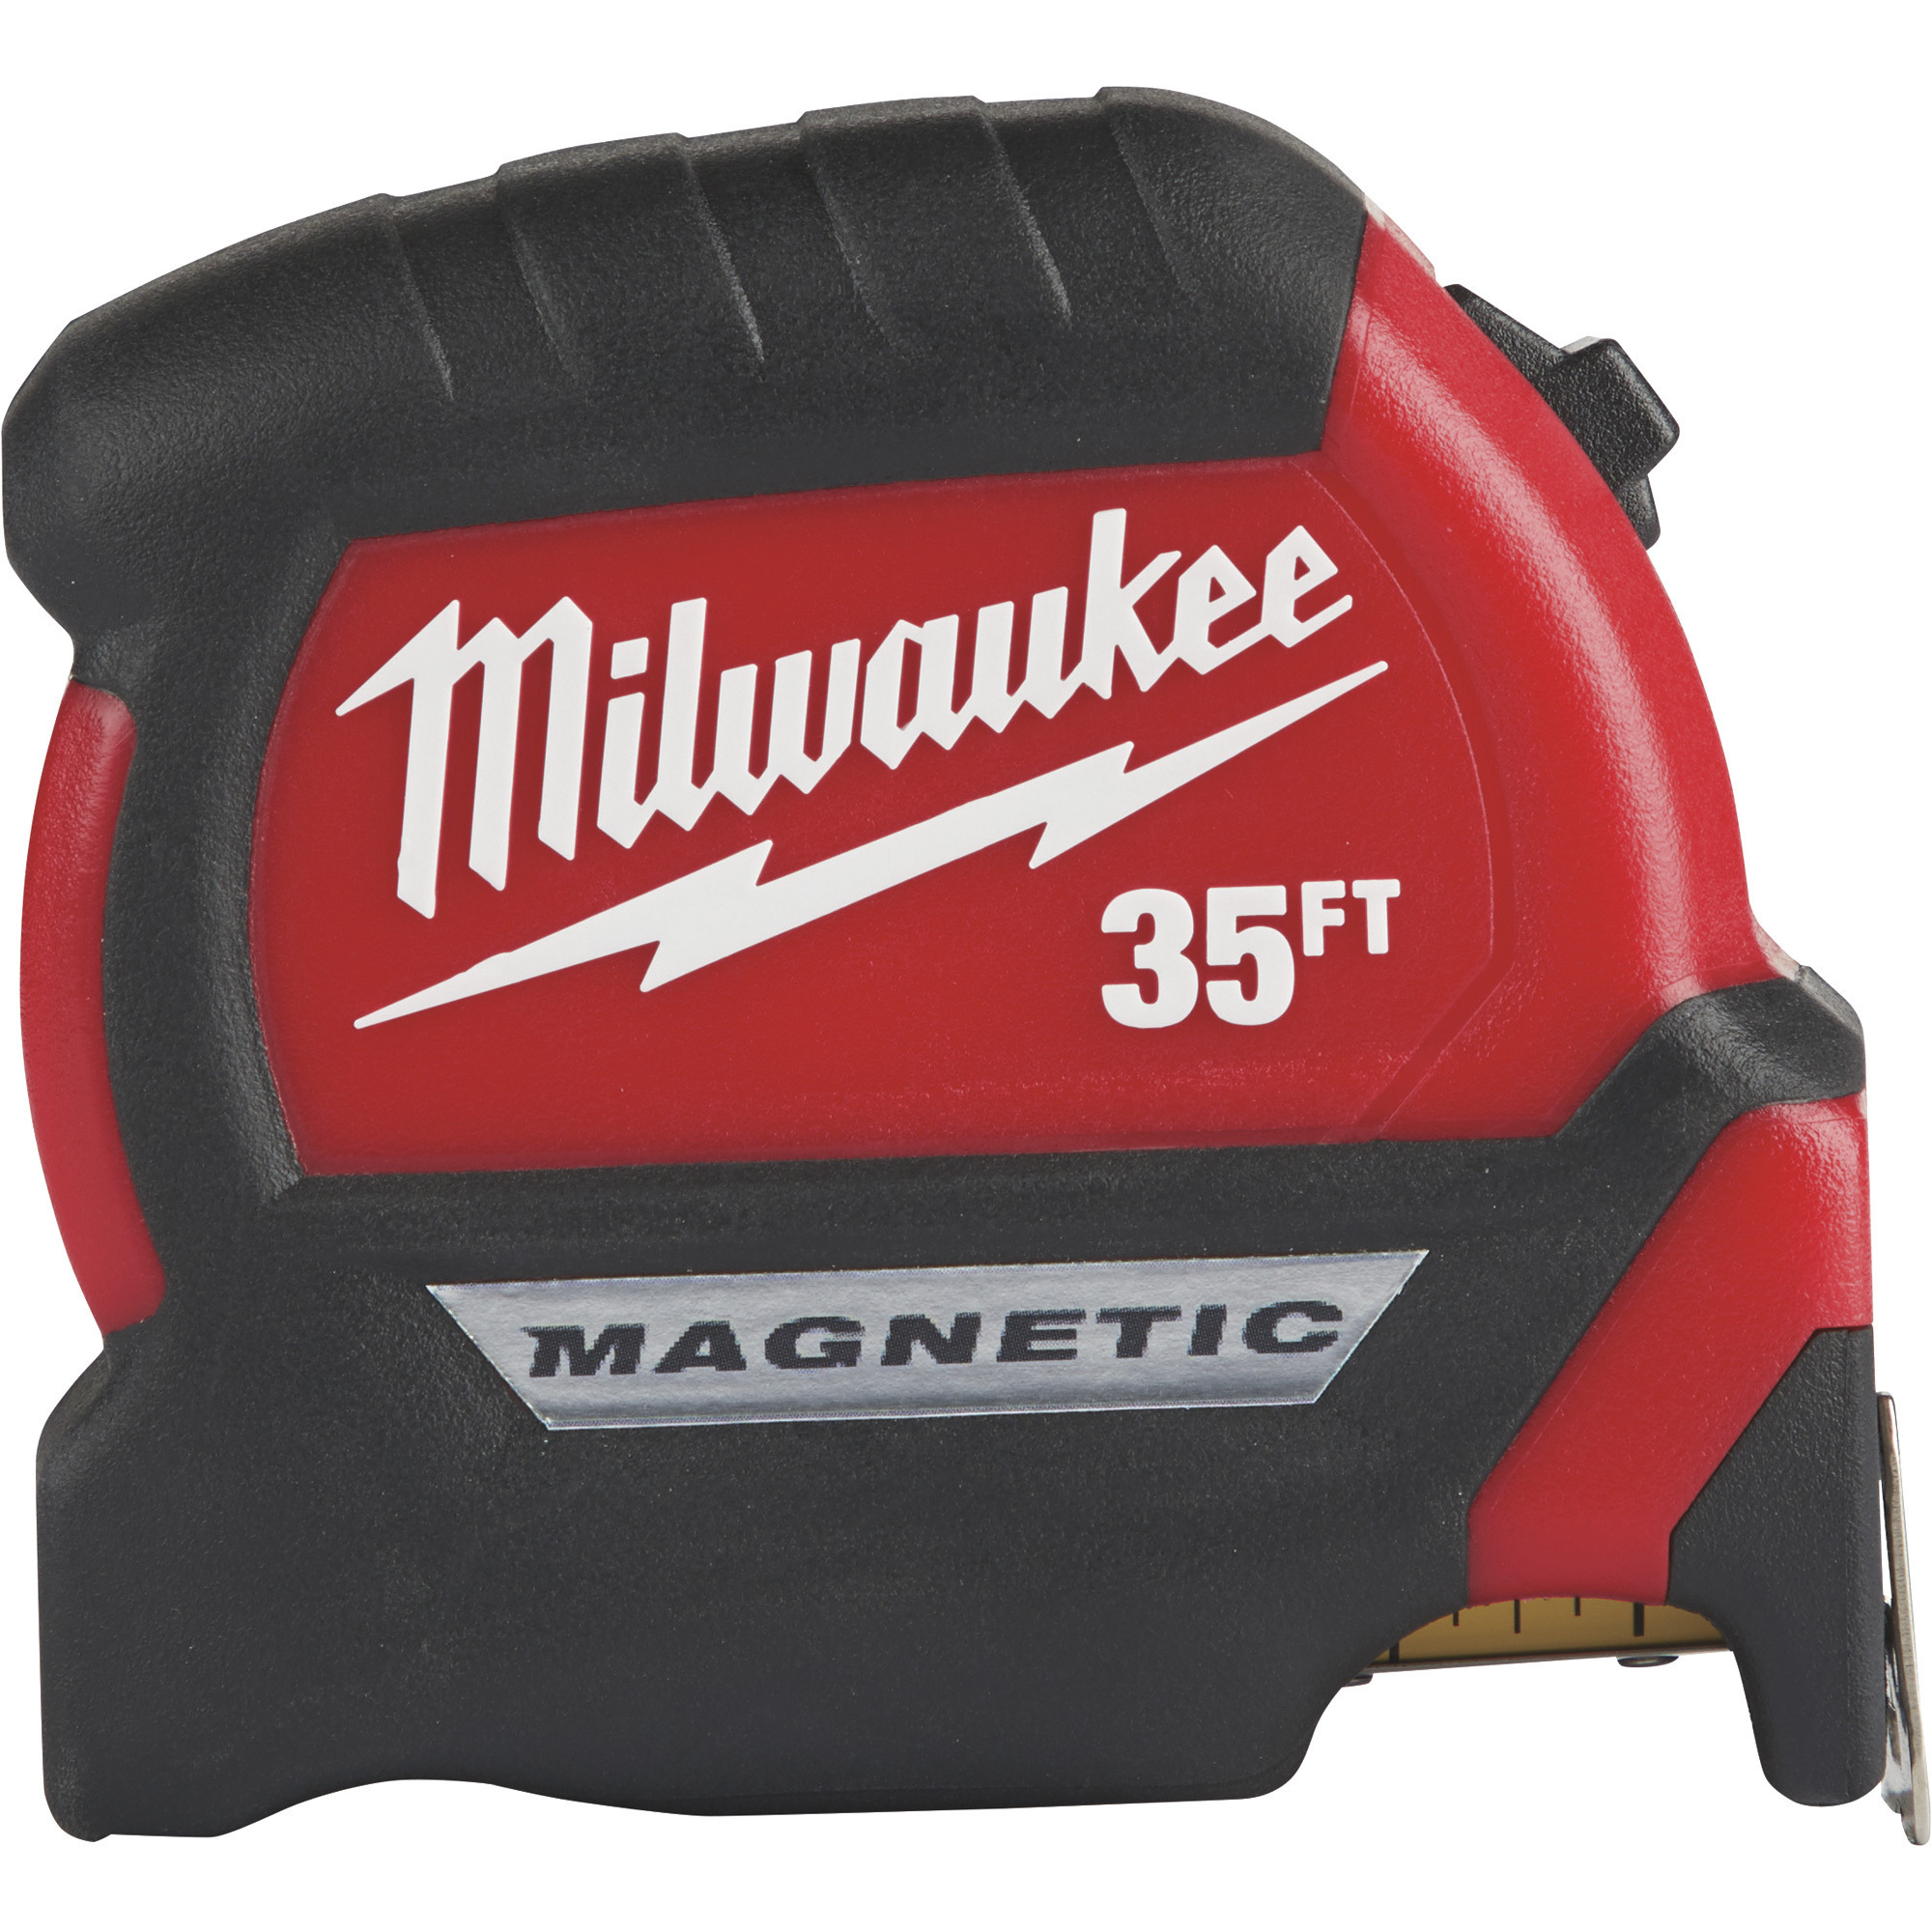 Milwaukee 35ft. Compact Magnetic Tape Measure, Model 48-22-0335